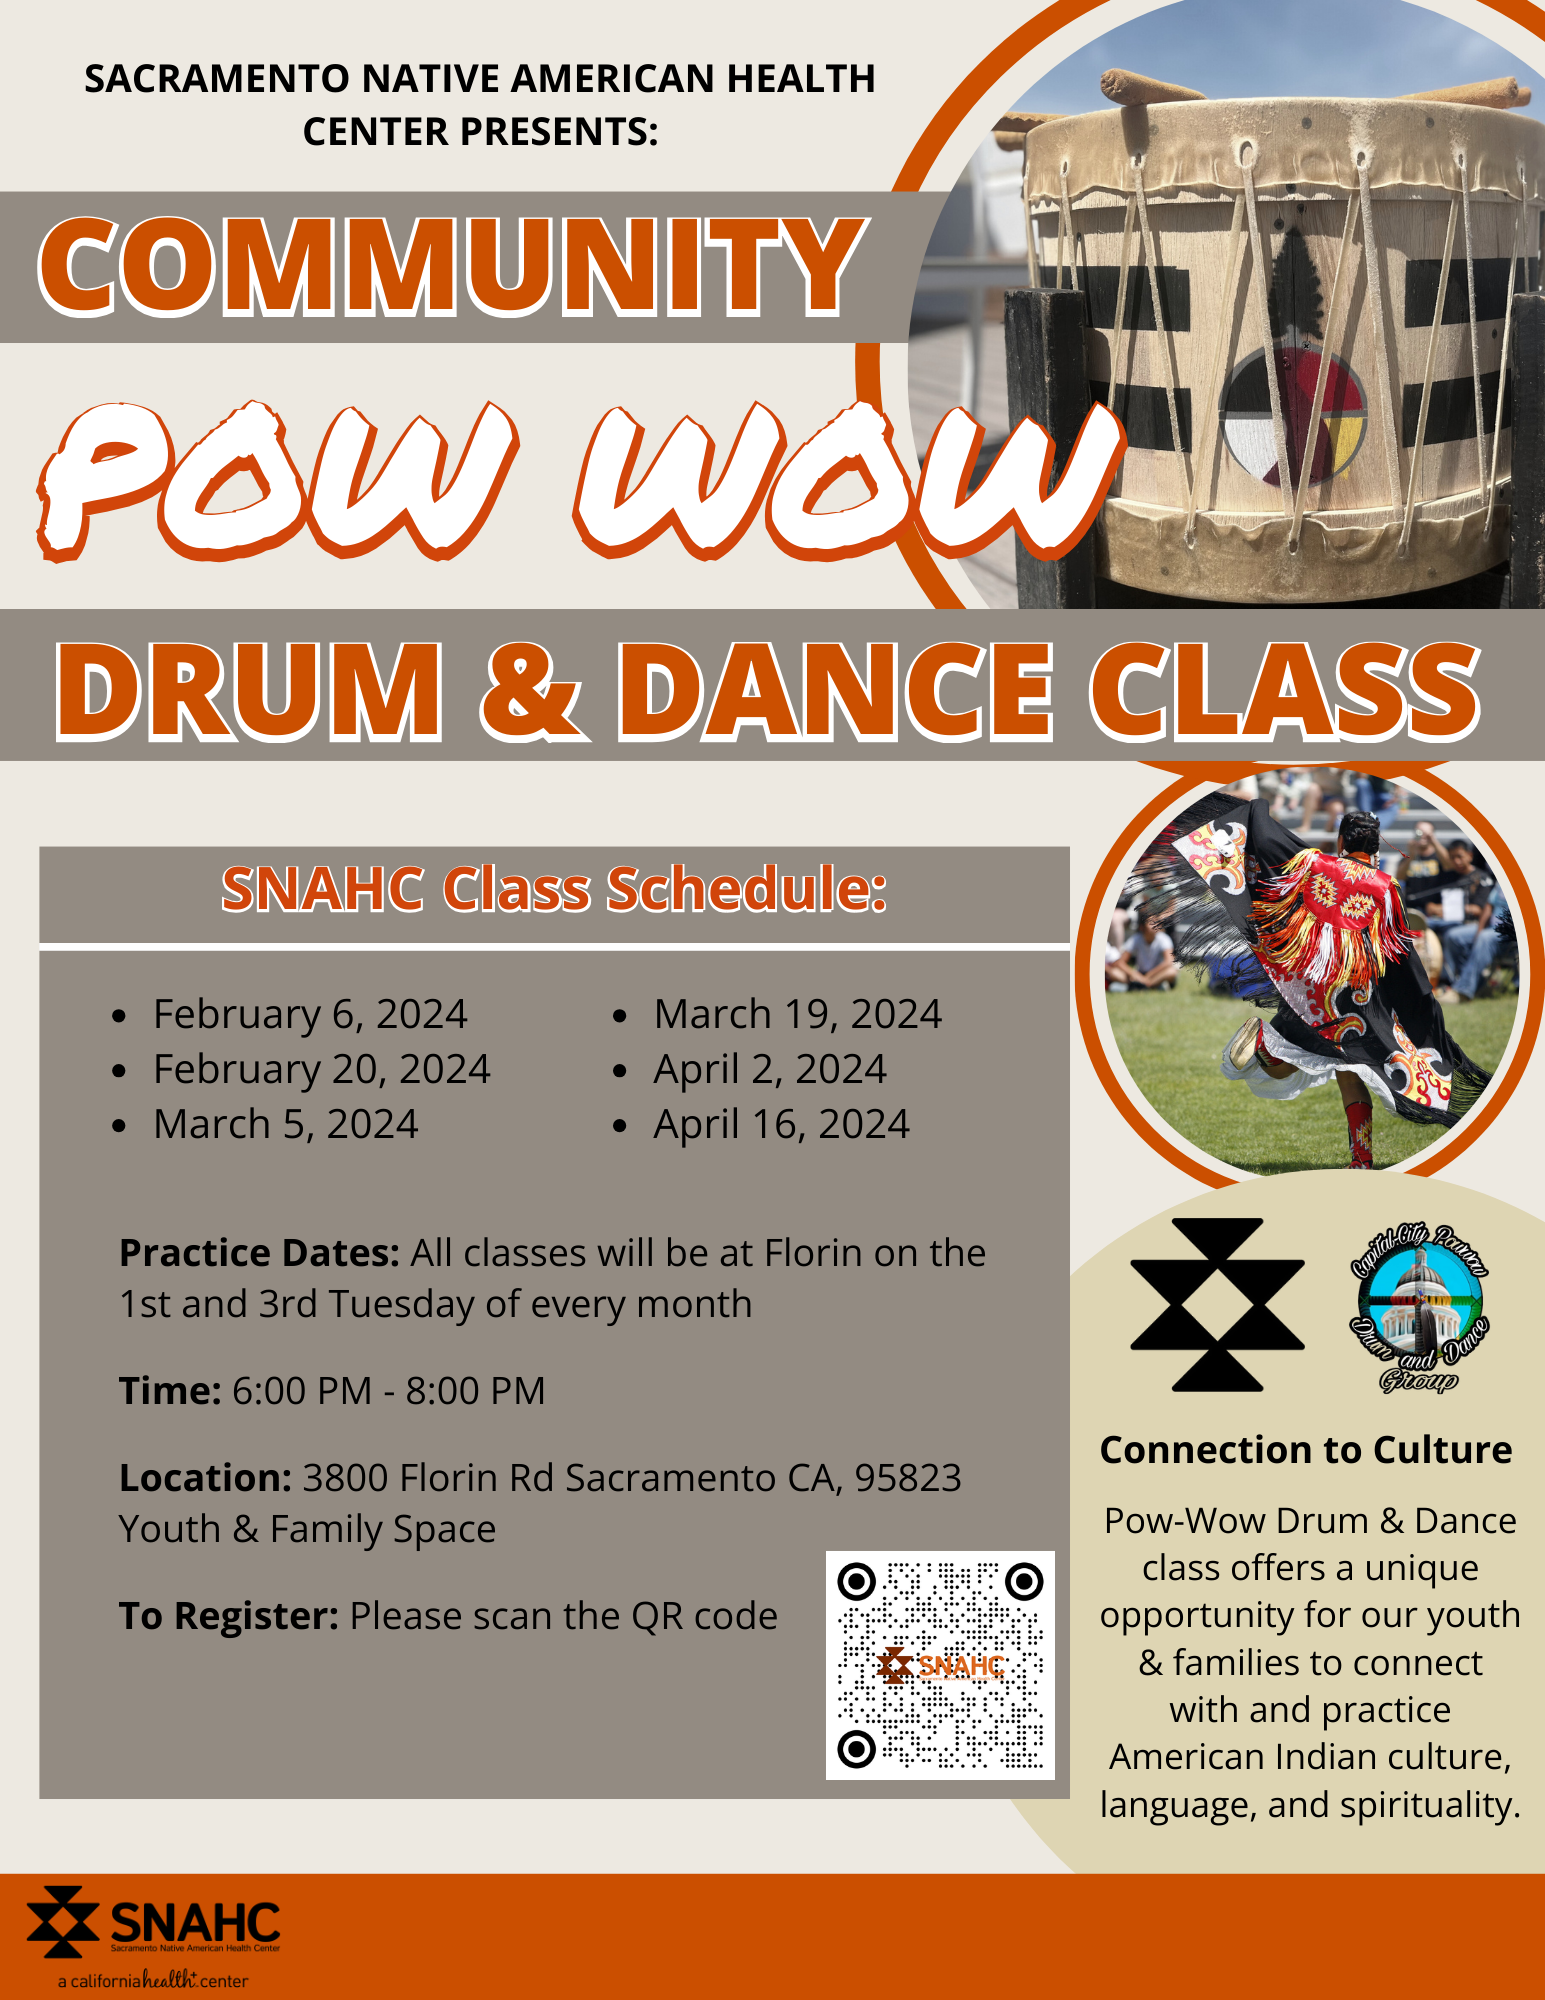 Community Pow Wow Drum and Dance class. Taking place at SNAHC Florin Road on the 1st and 3rd Tuesday of every month from 6:00 - 8:00 pm.